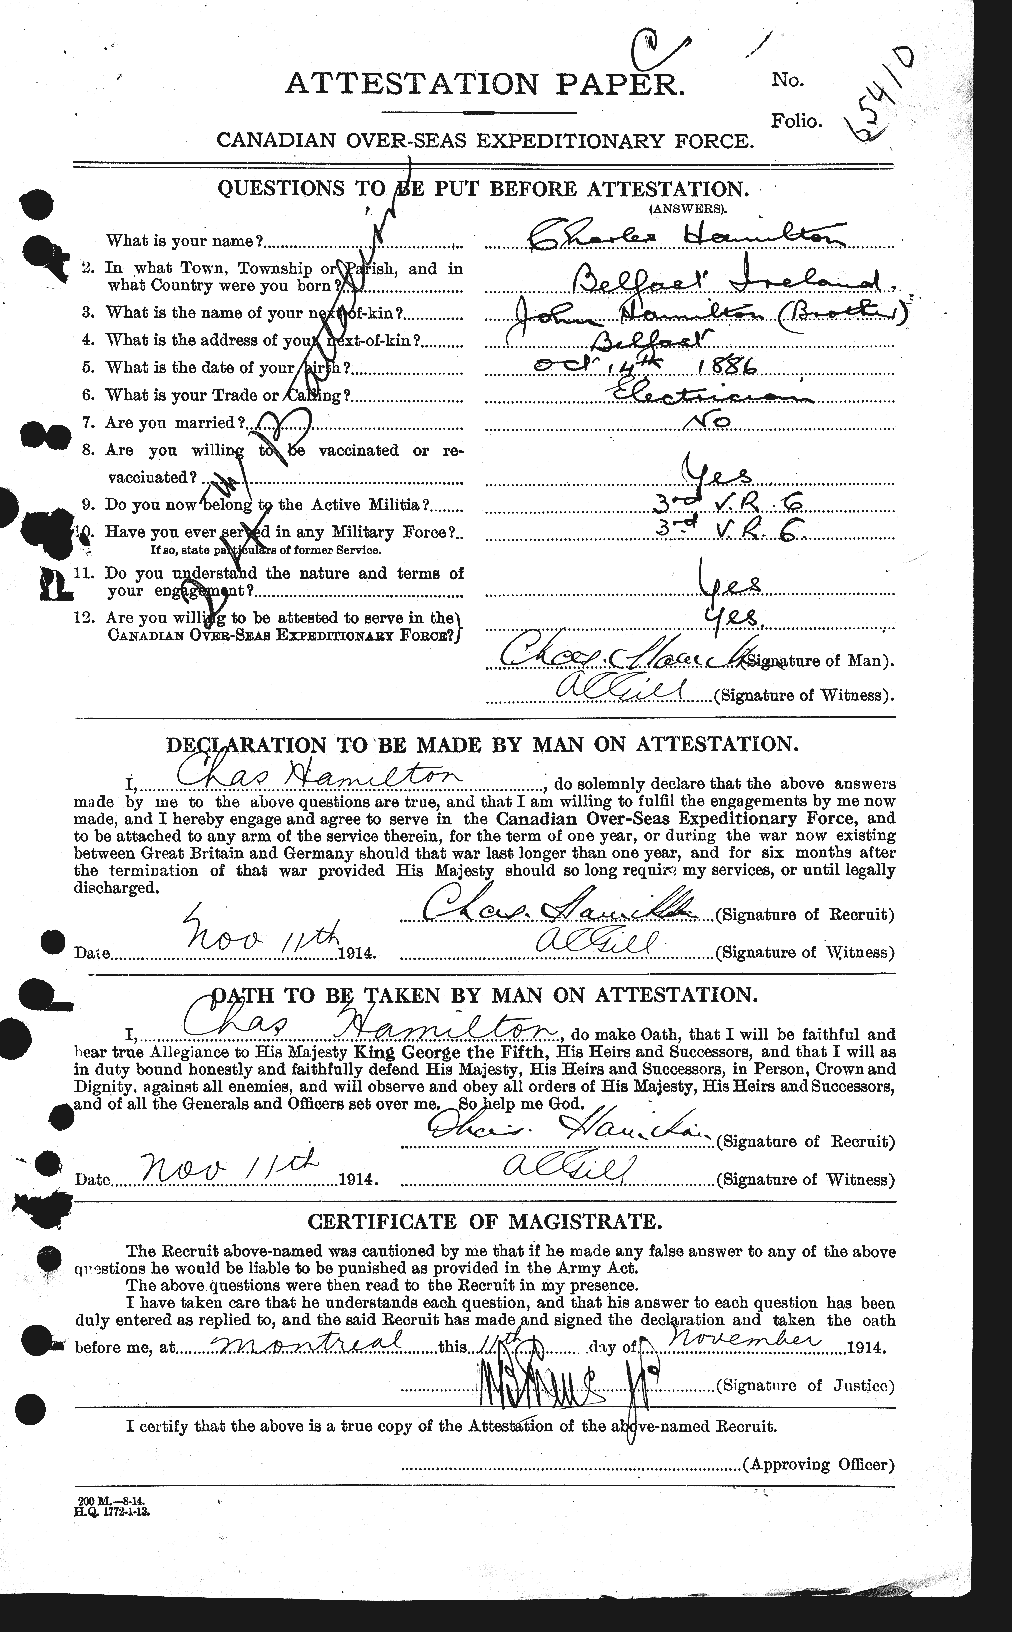 Personnel Records of the First World War - CEF 375294a